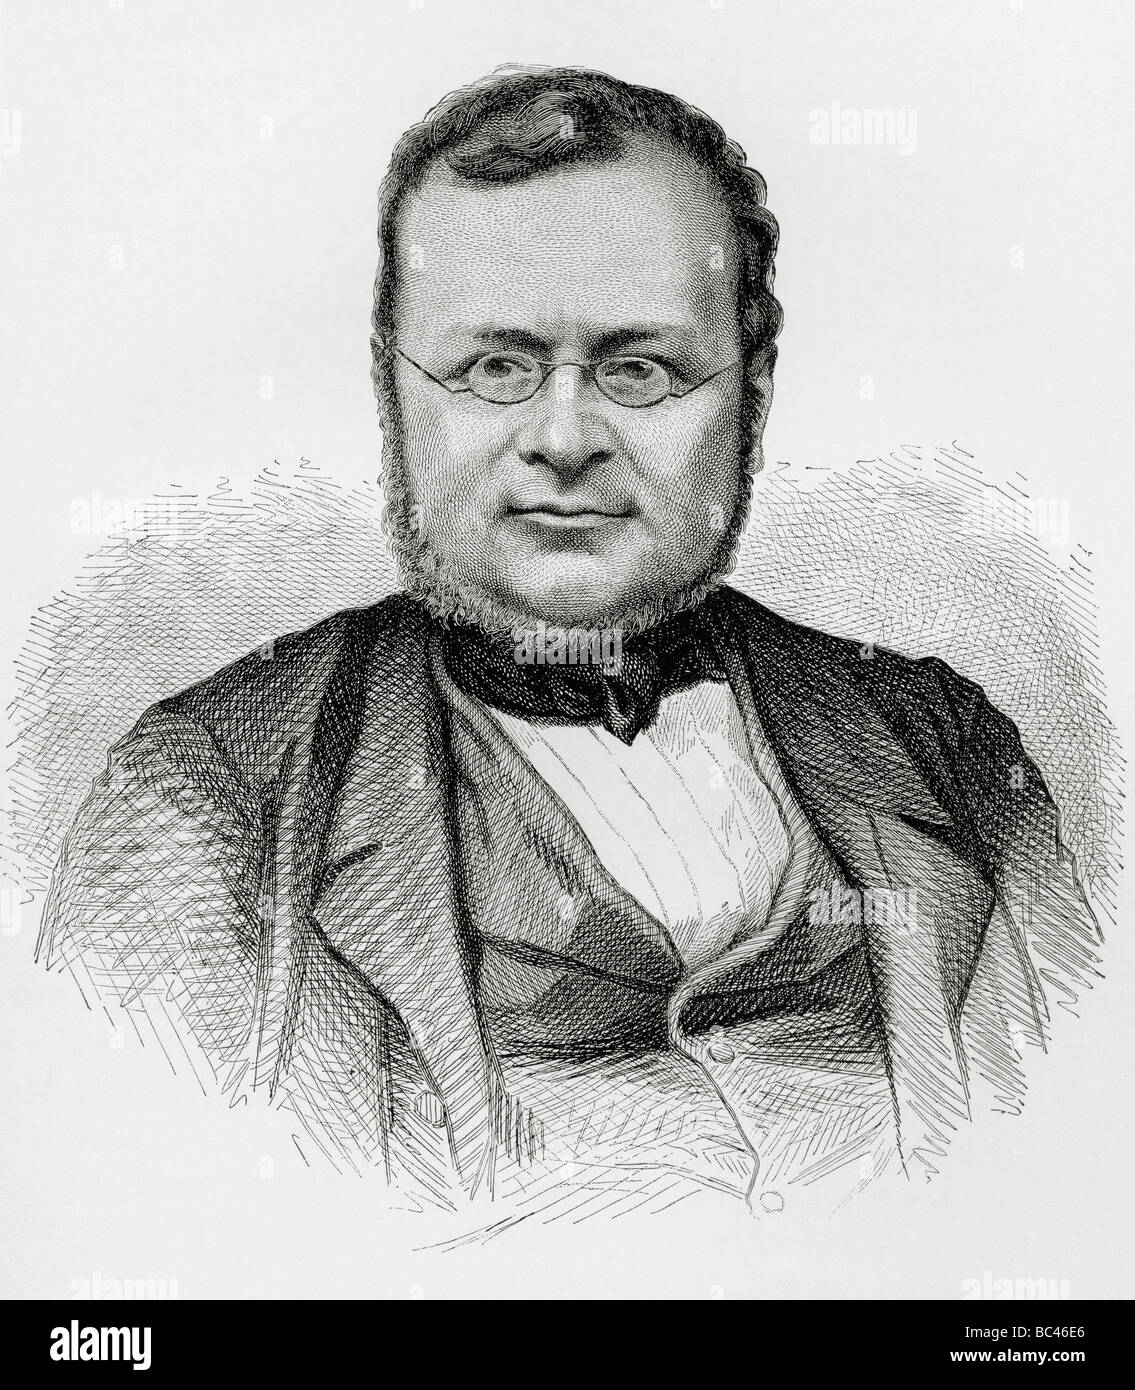 Camillo Paolo Filippo Giulio Benso, Count of Cavour, of Isolabella and of Leri, 1810 to 1861. First Prime Minister of Italy. Stock Photo